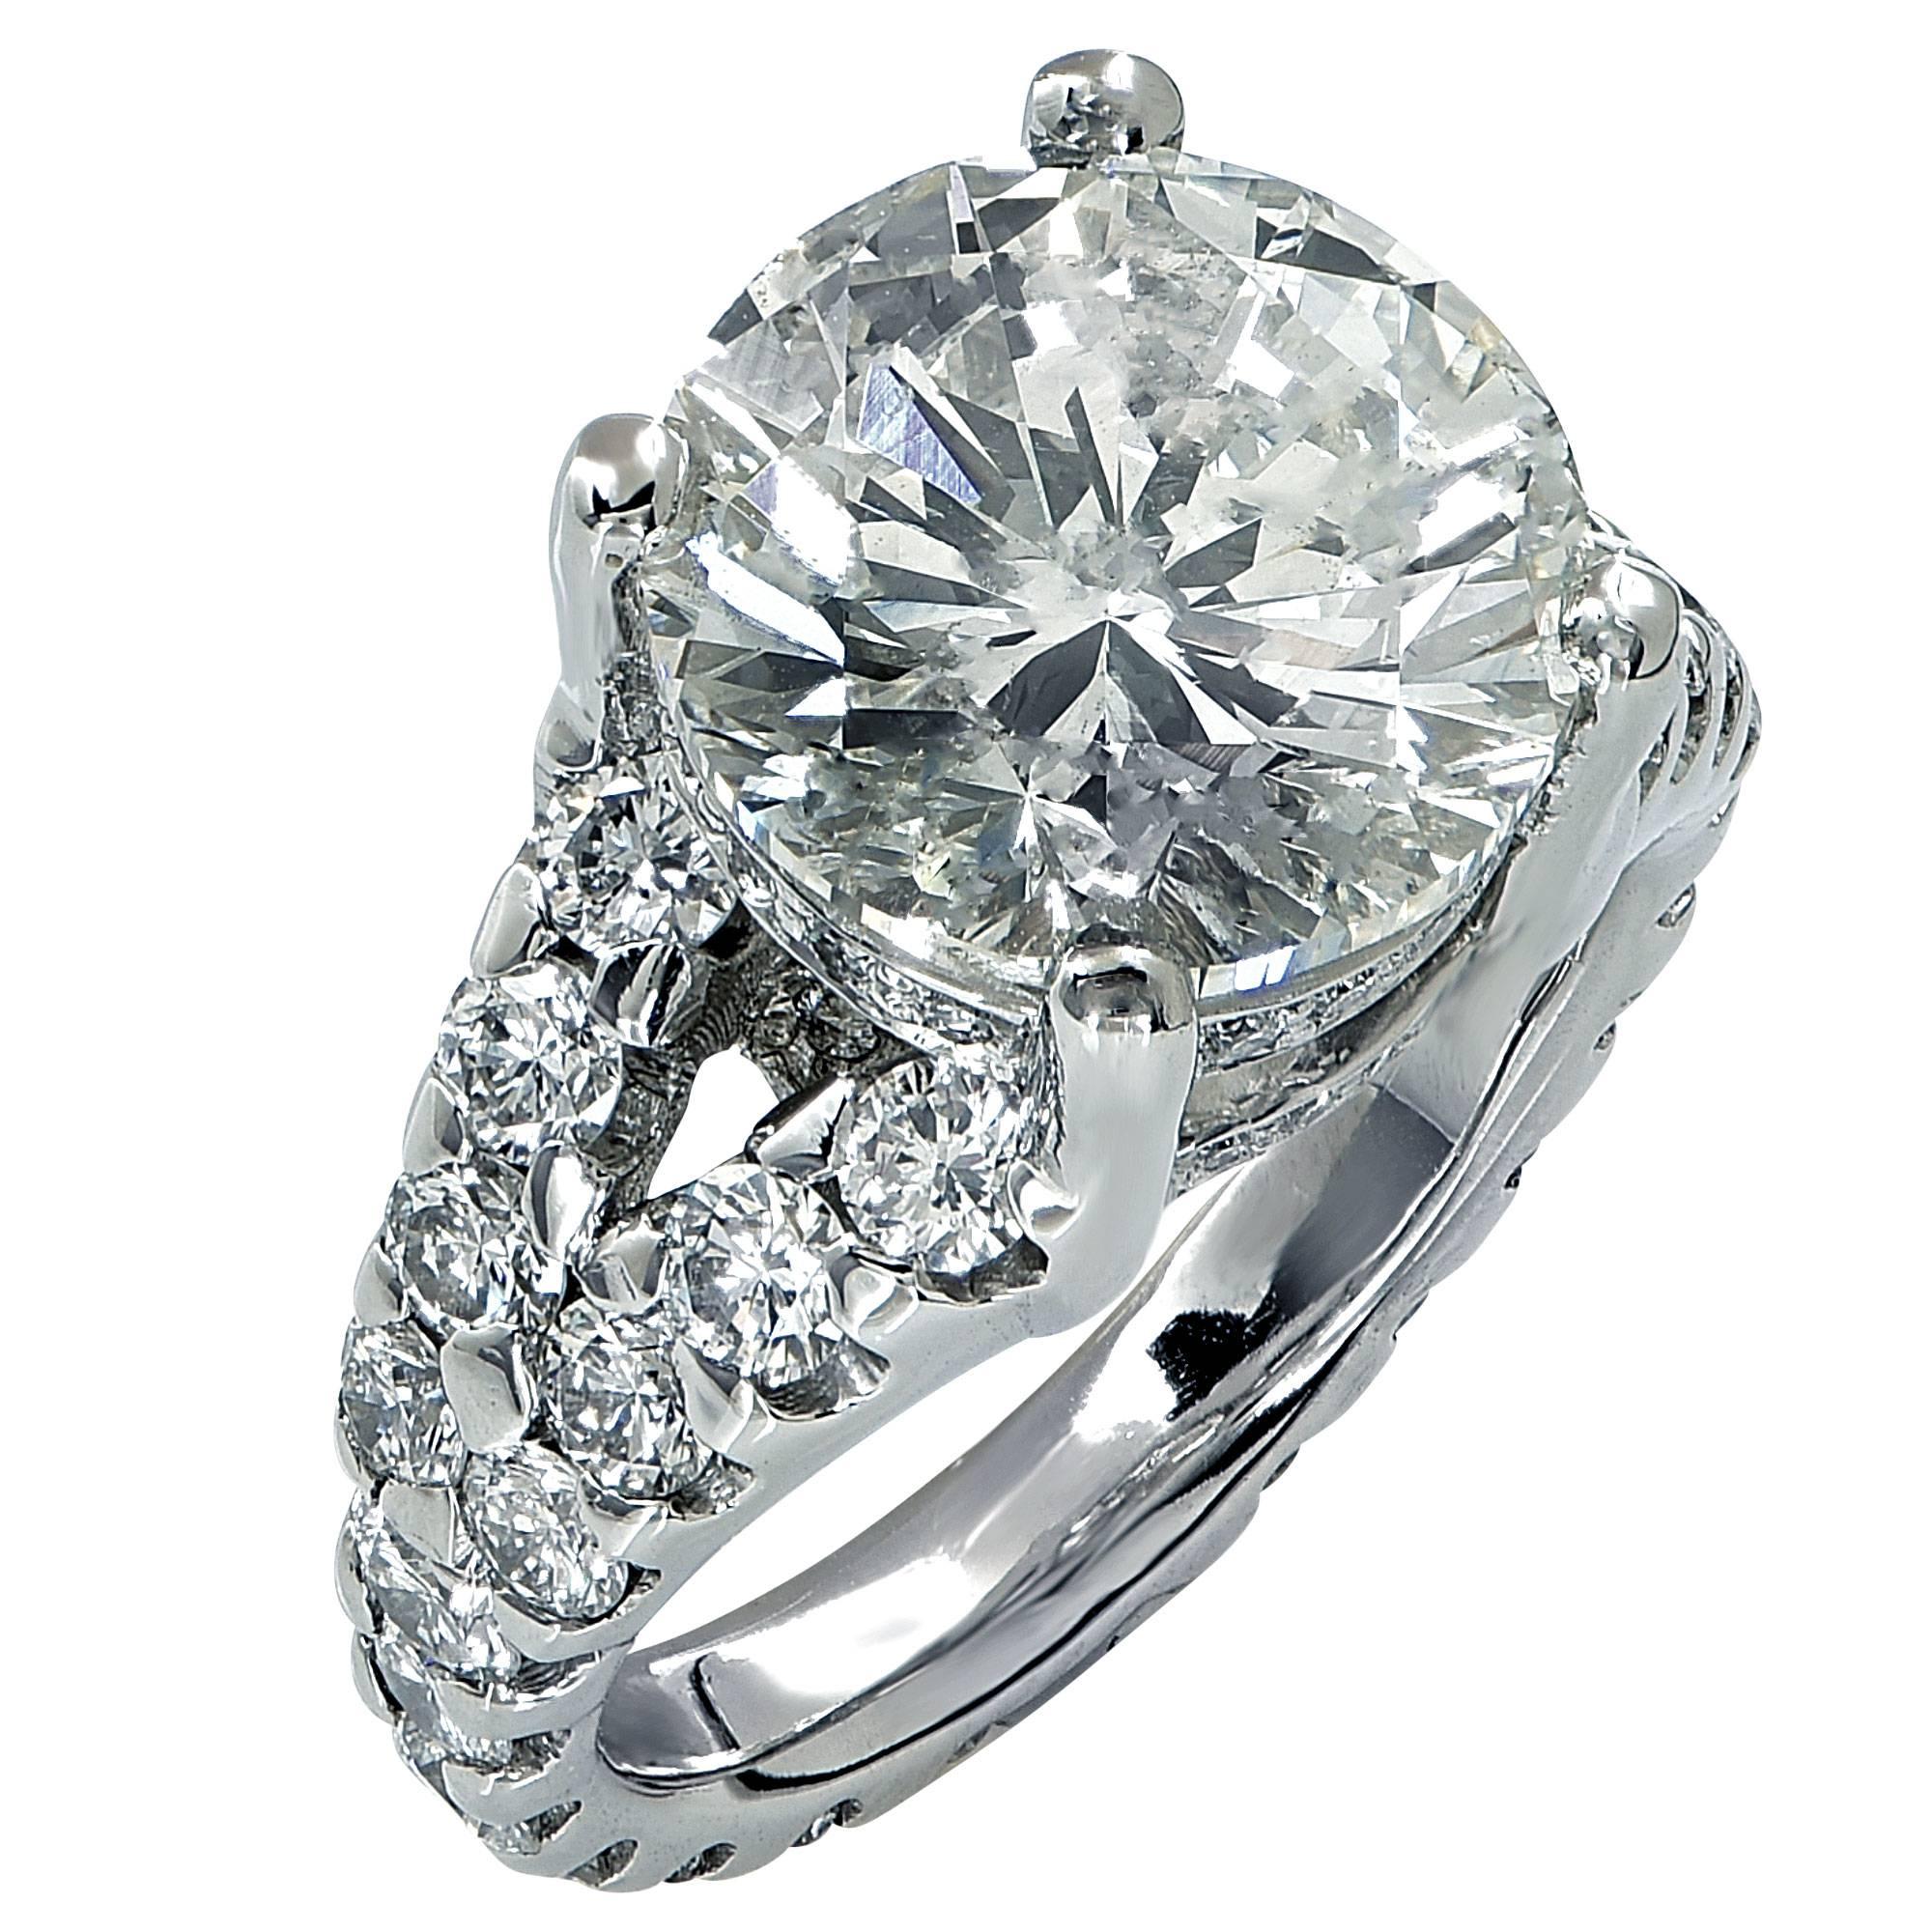 Platinum custom made ring featuring an EGL graded 7.01ct round brilliant cut diamond I color SI2 clarity accented by 54 round brilliant cut diamonds weighing approximately 3cts total, G-H color VS clarity.

The ring is a size 7 and cannot be